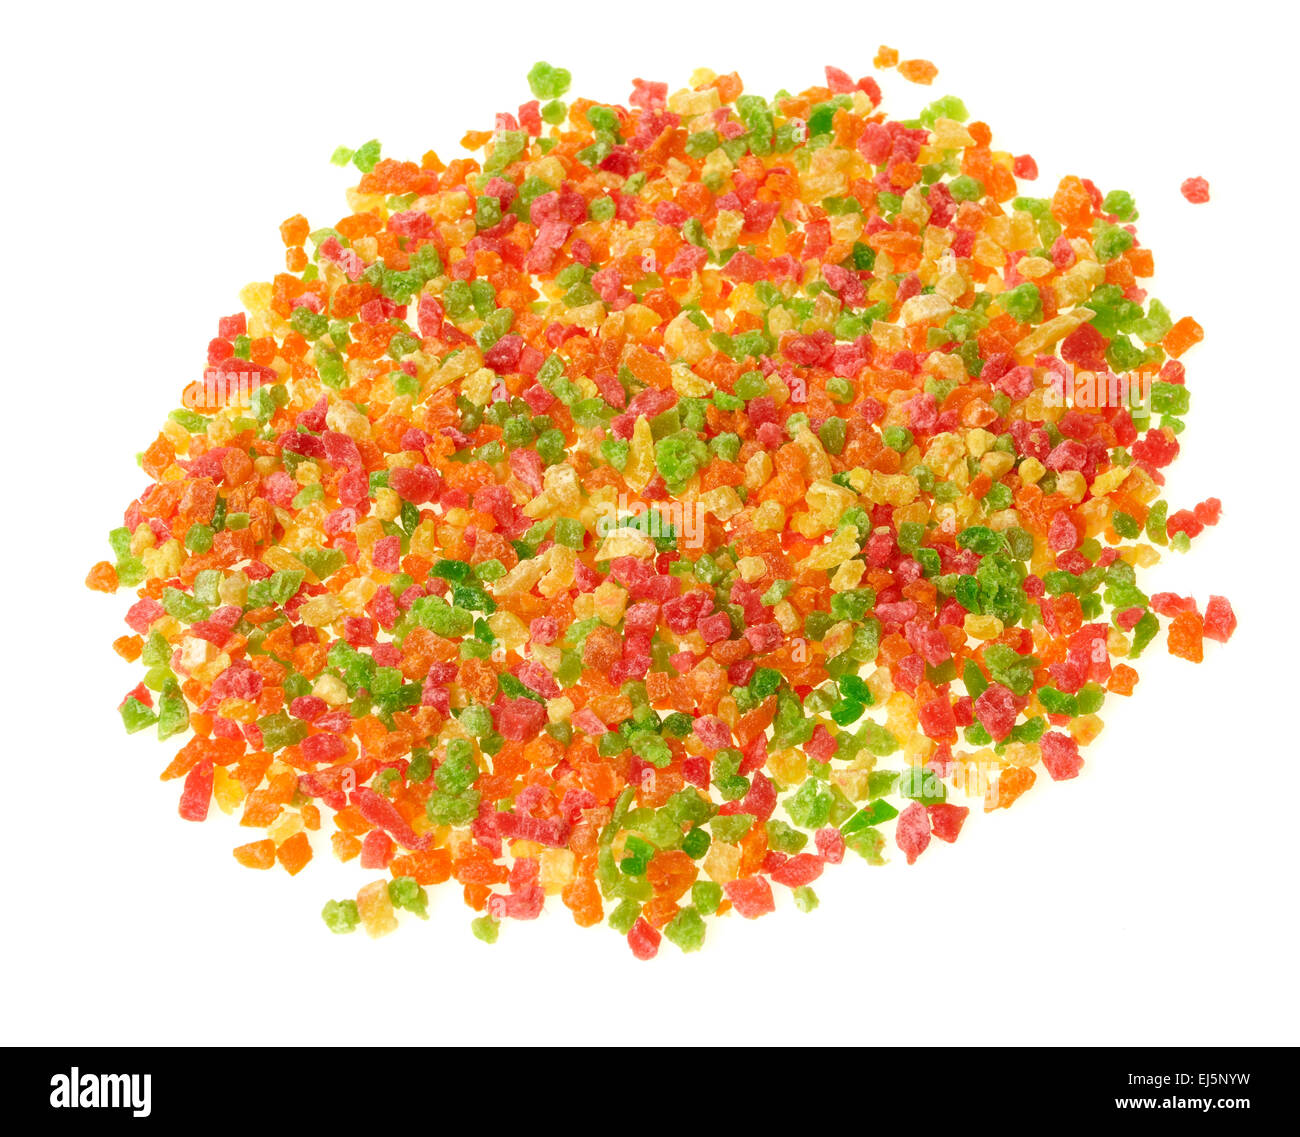 Diced pineapple. Candied fruits. Stock Photo